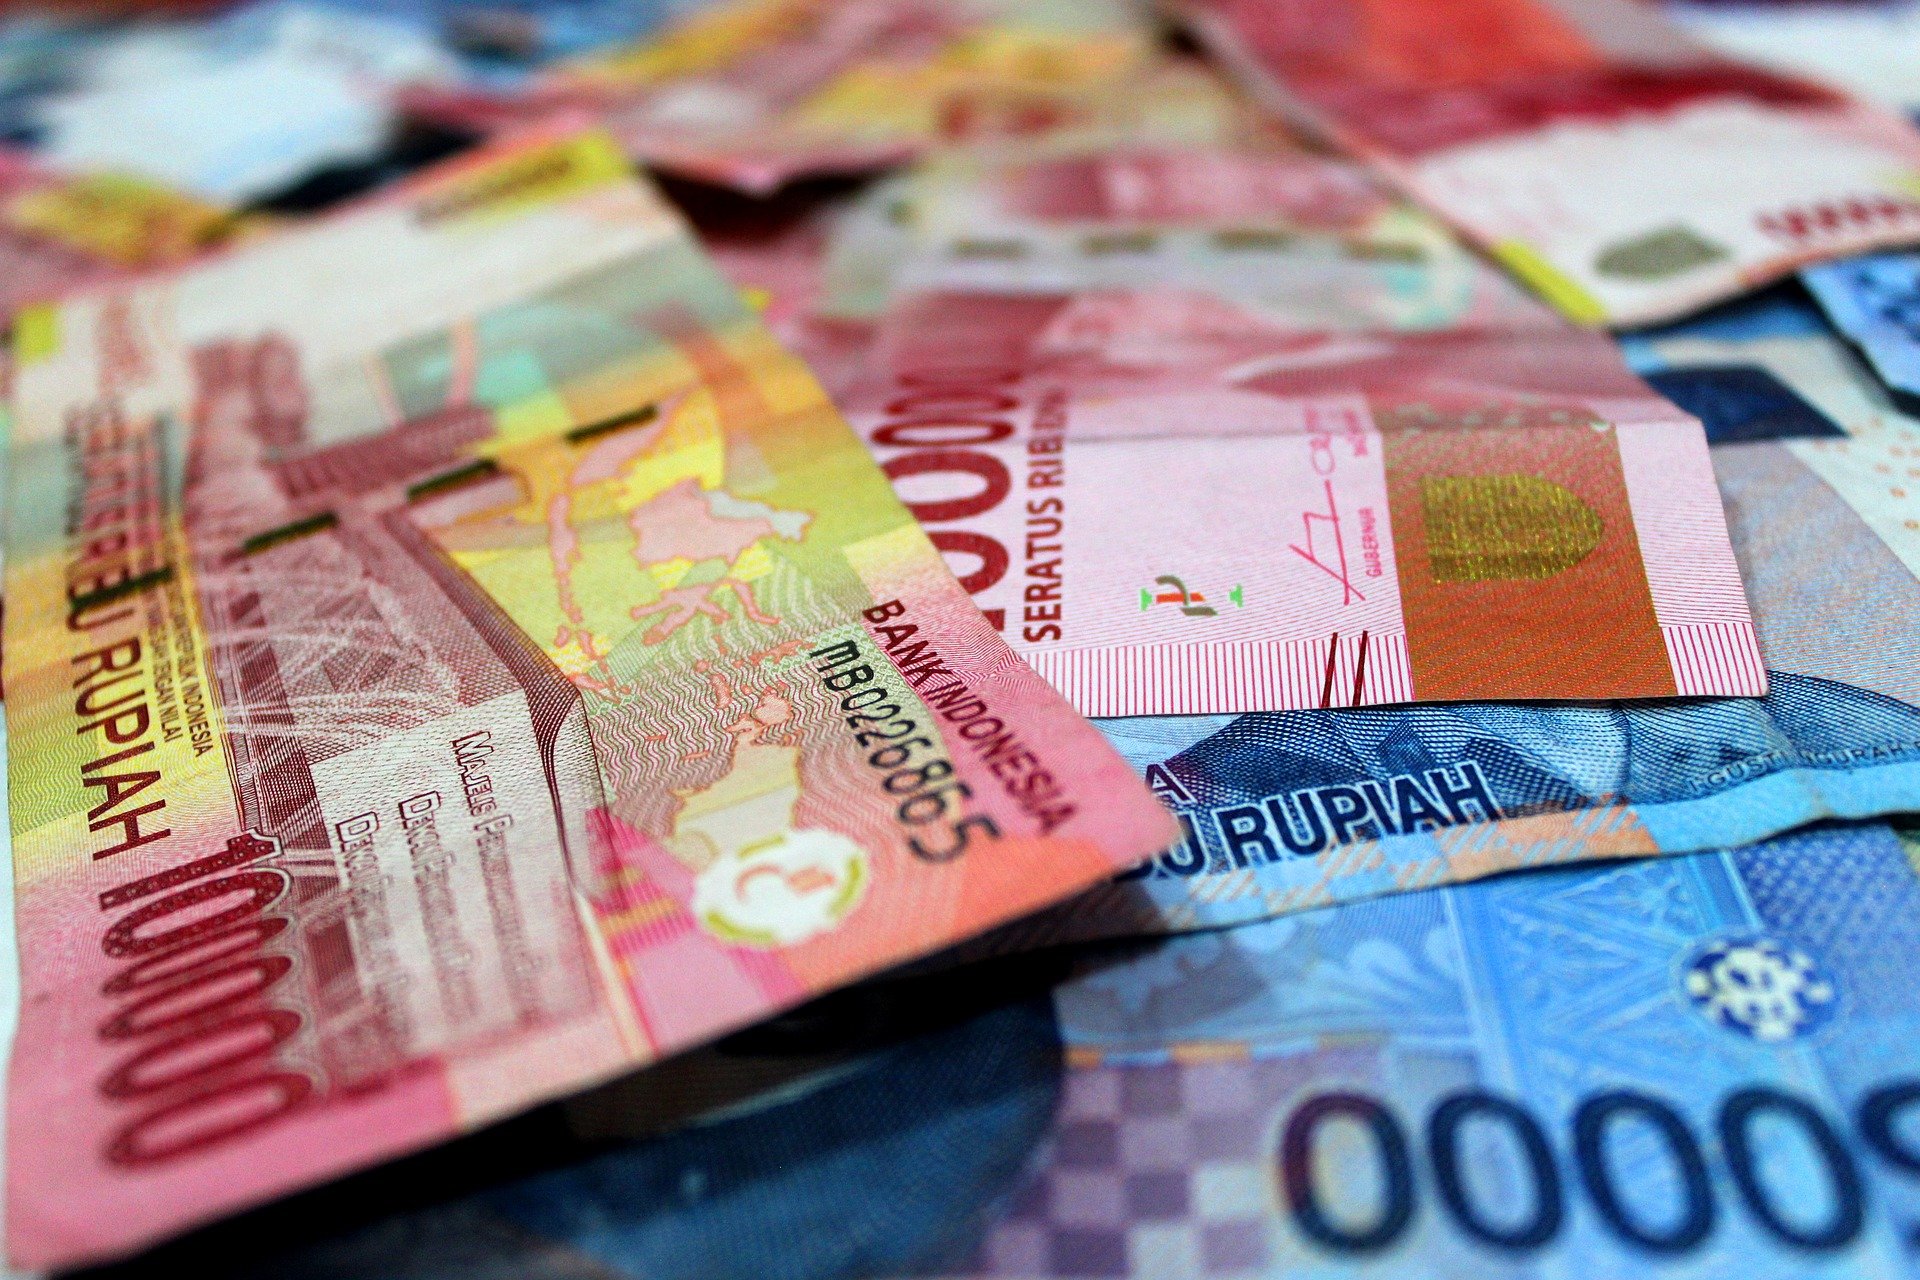 Digital rupiah expected to increase Indonesia’s economic efficiency